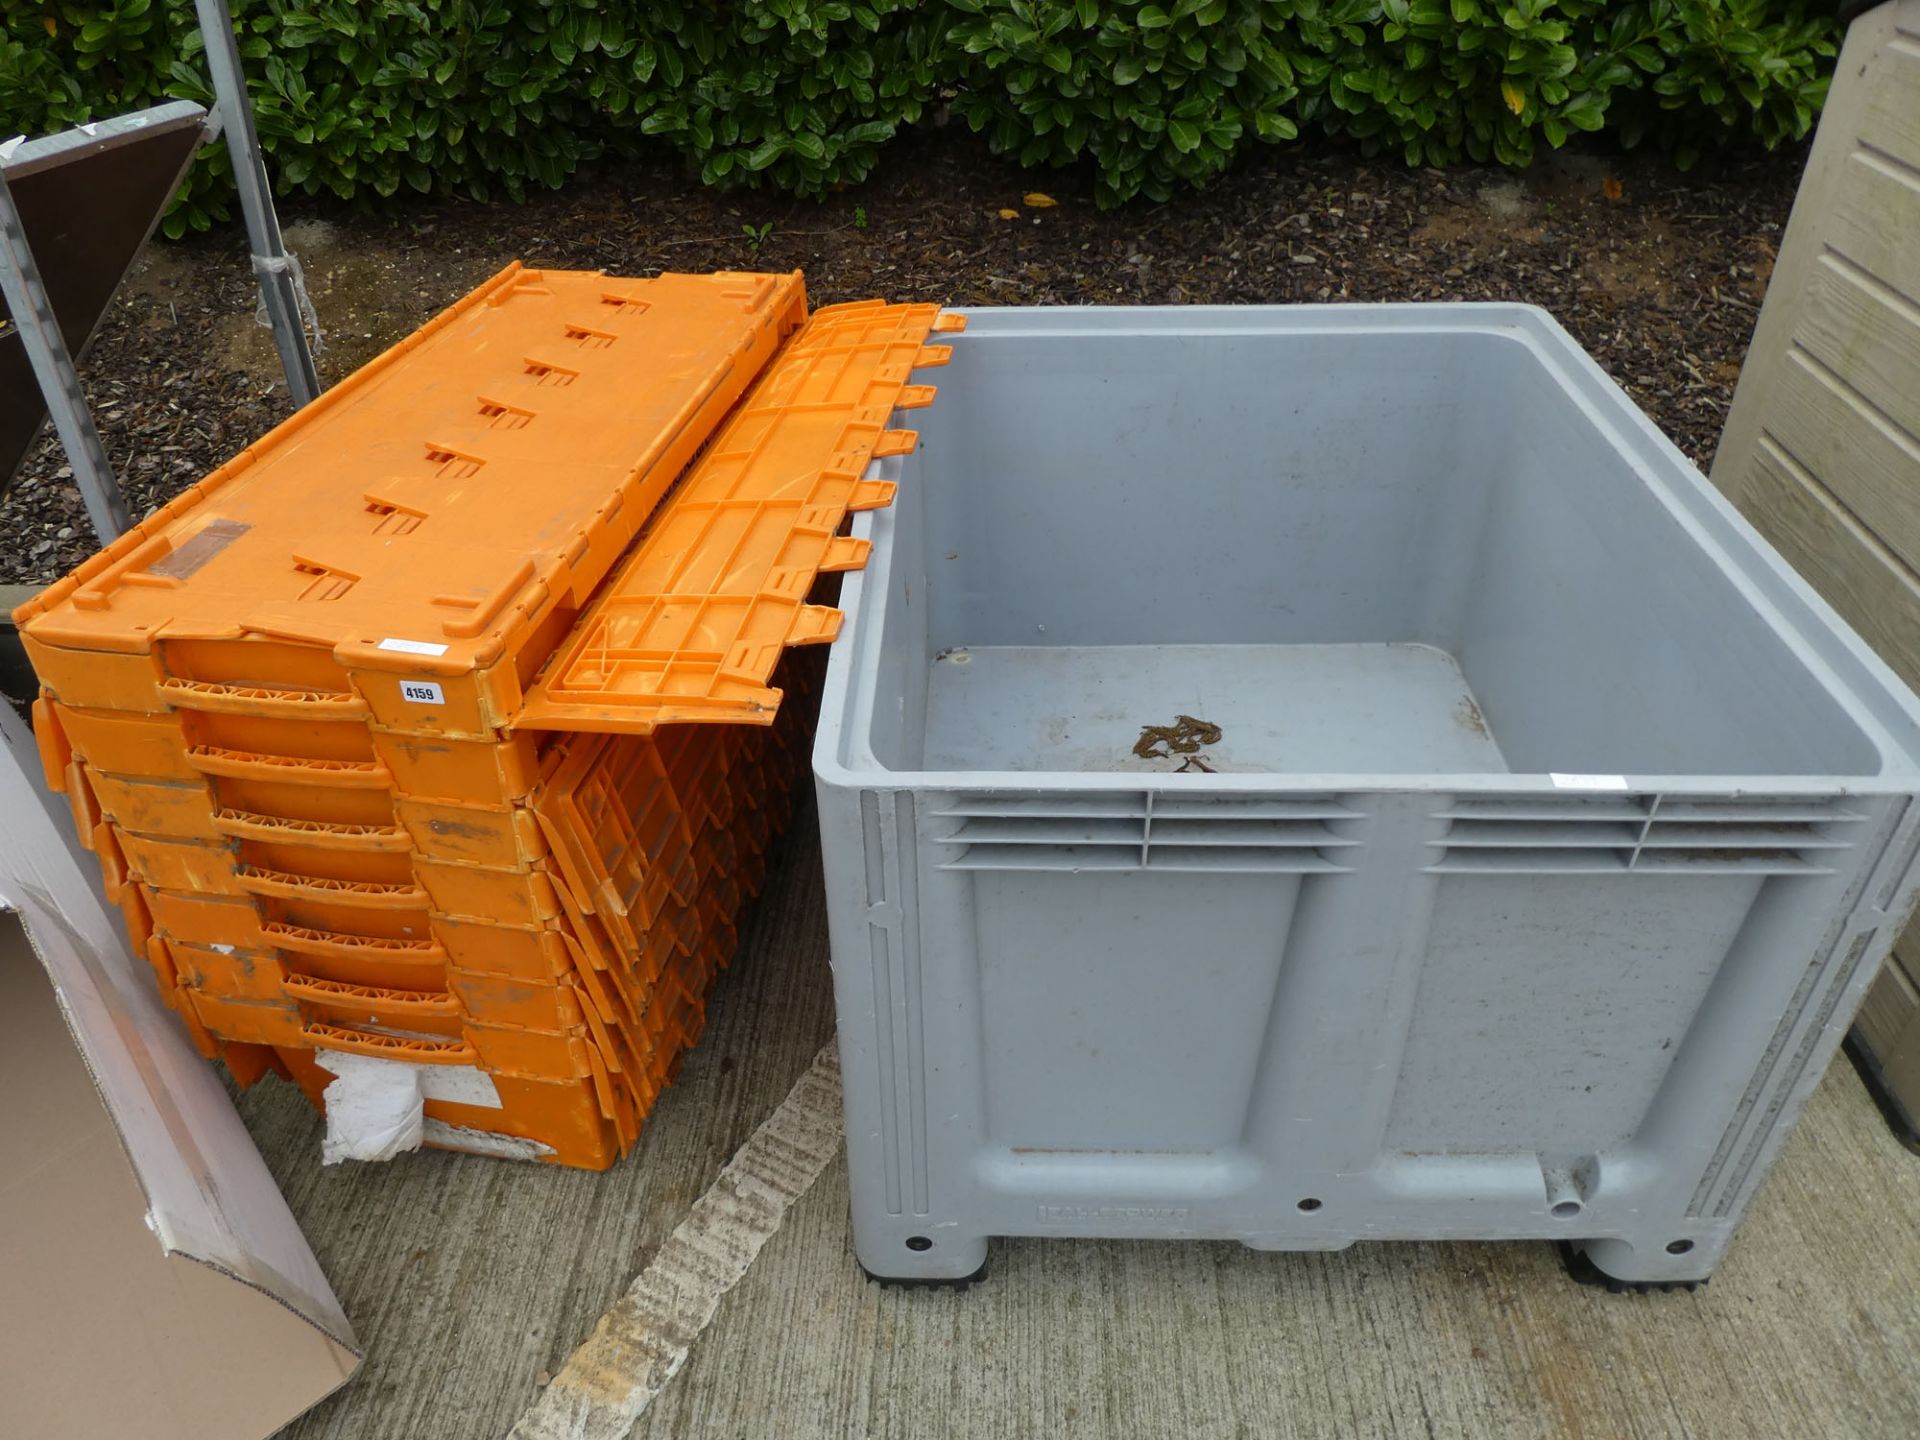 4121 - Orange plastic stacking crates and a large grey crate